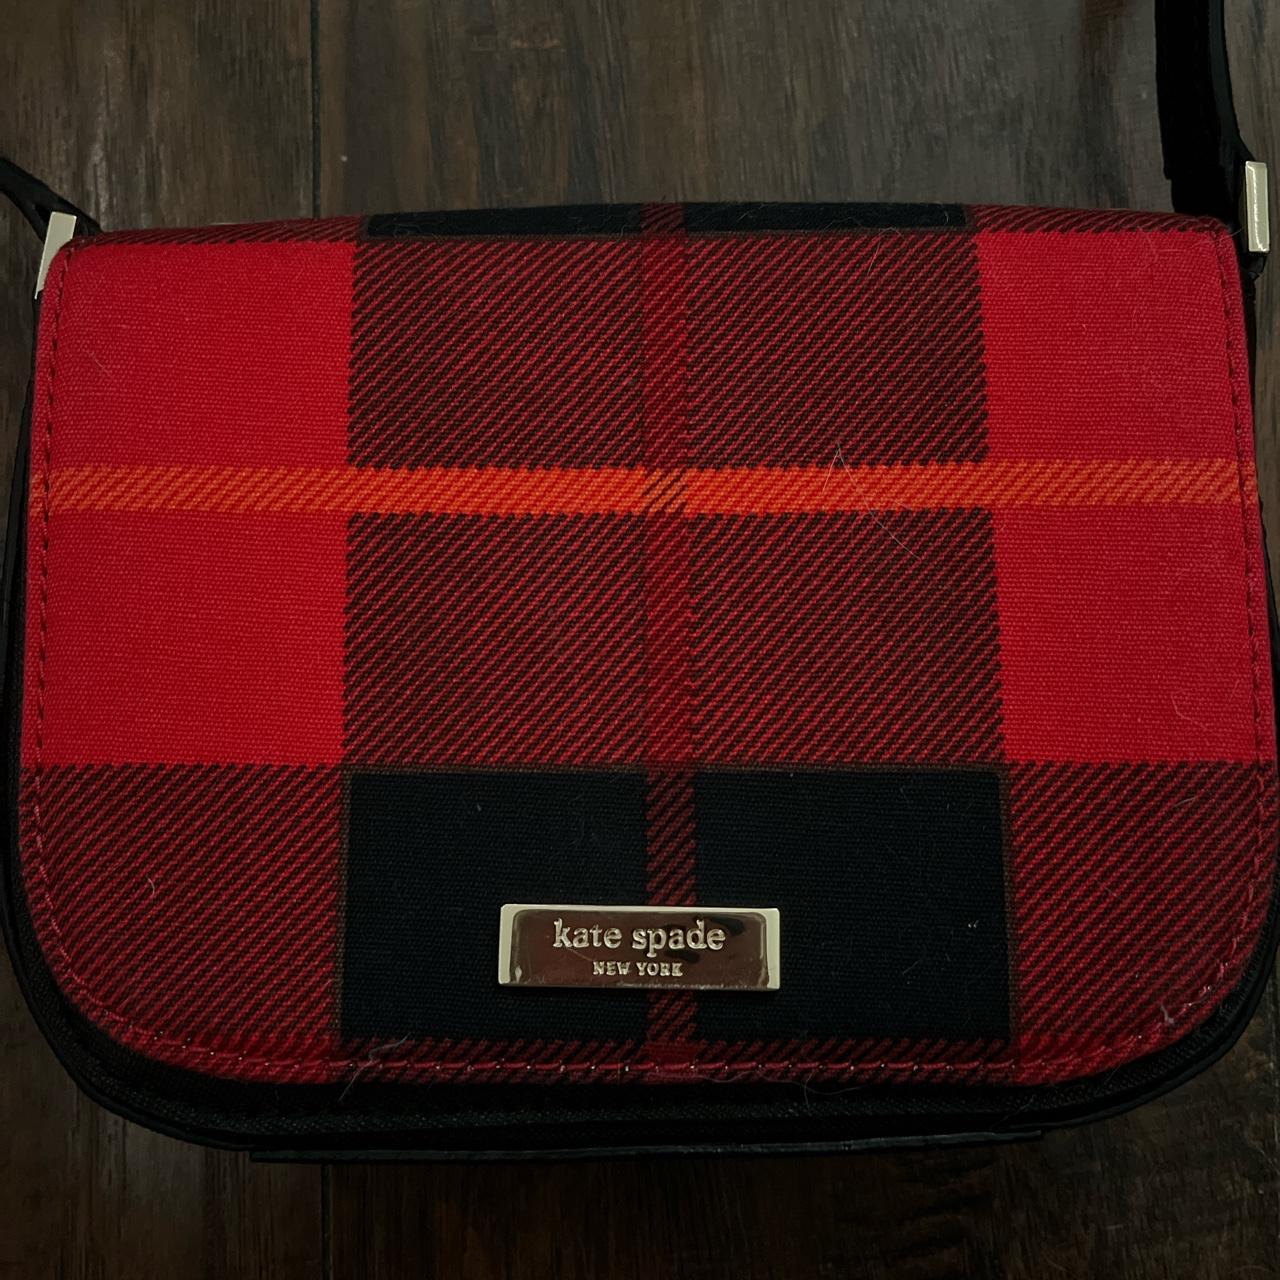 Amazon.com: MONOBLANKS Women Buffalo Plaid Check Tote Set with Matching  Wristlet,Personalized Top Handle Handbag Working Bag Best Gift for Her (Red  Buffalo Plaid) : Clothing, Shoes & Jewelry